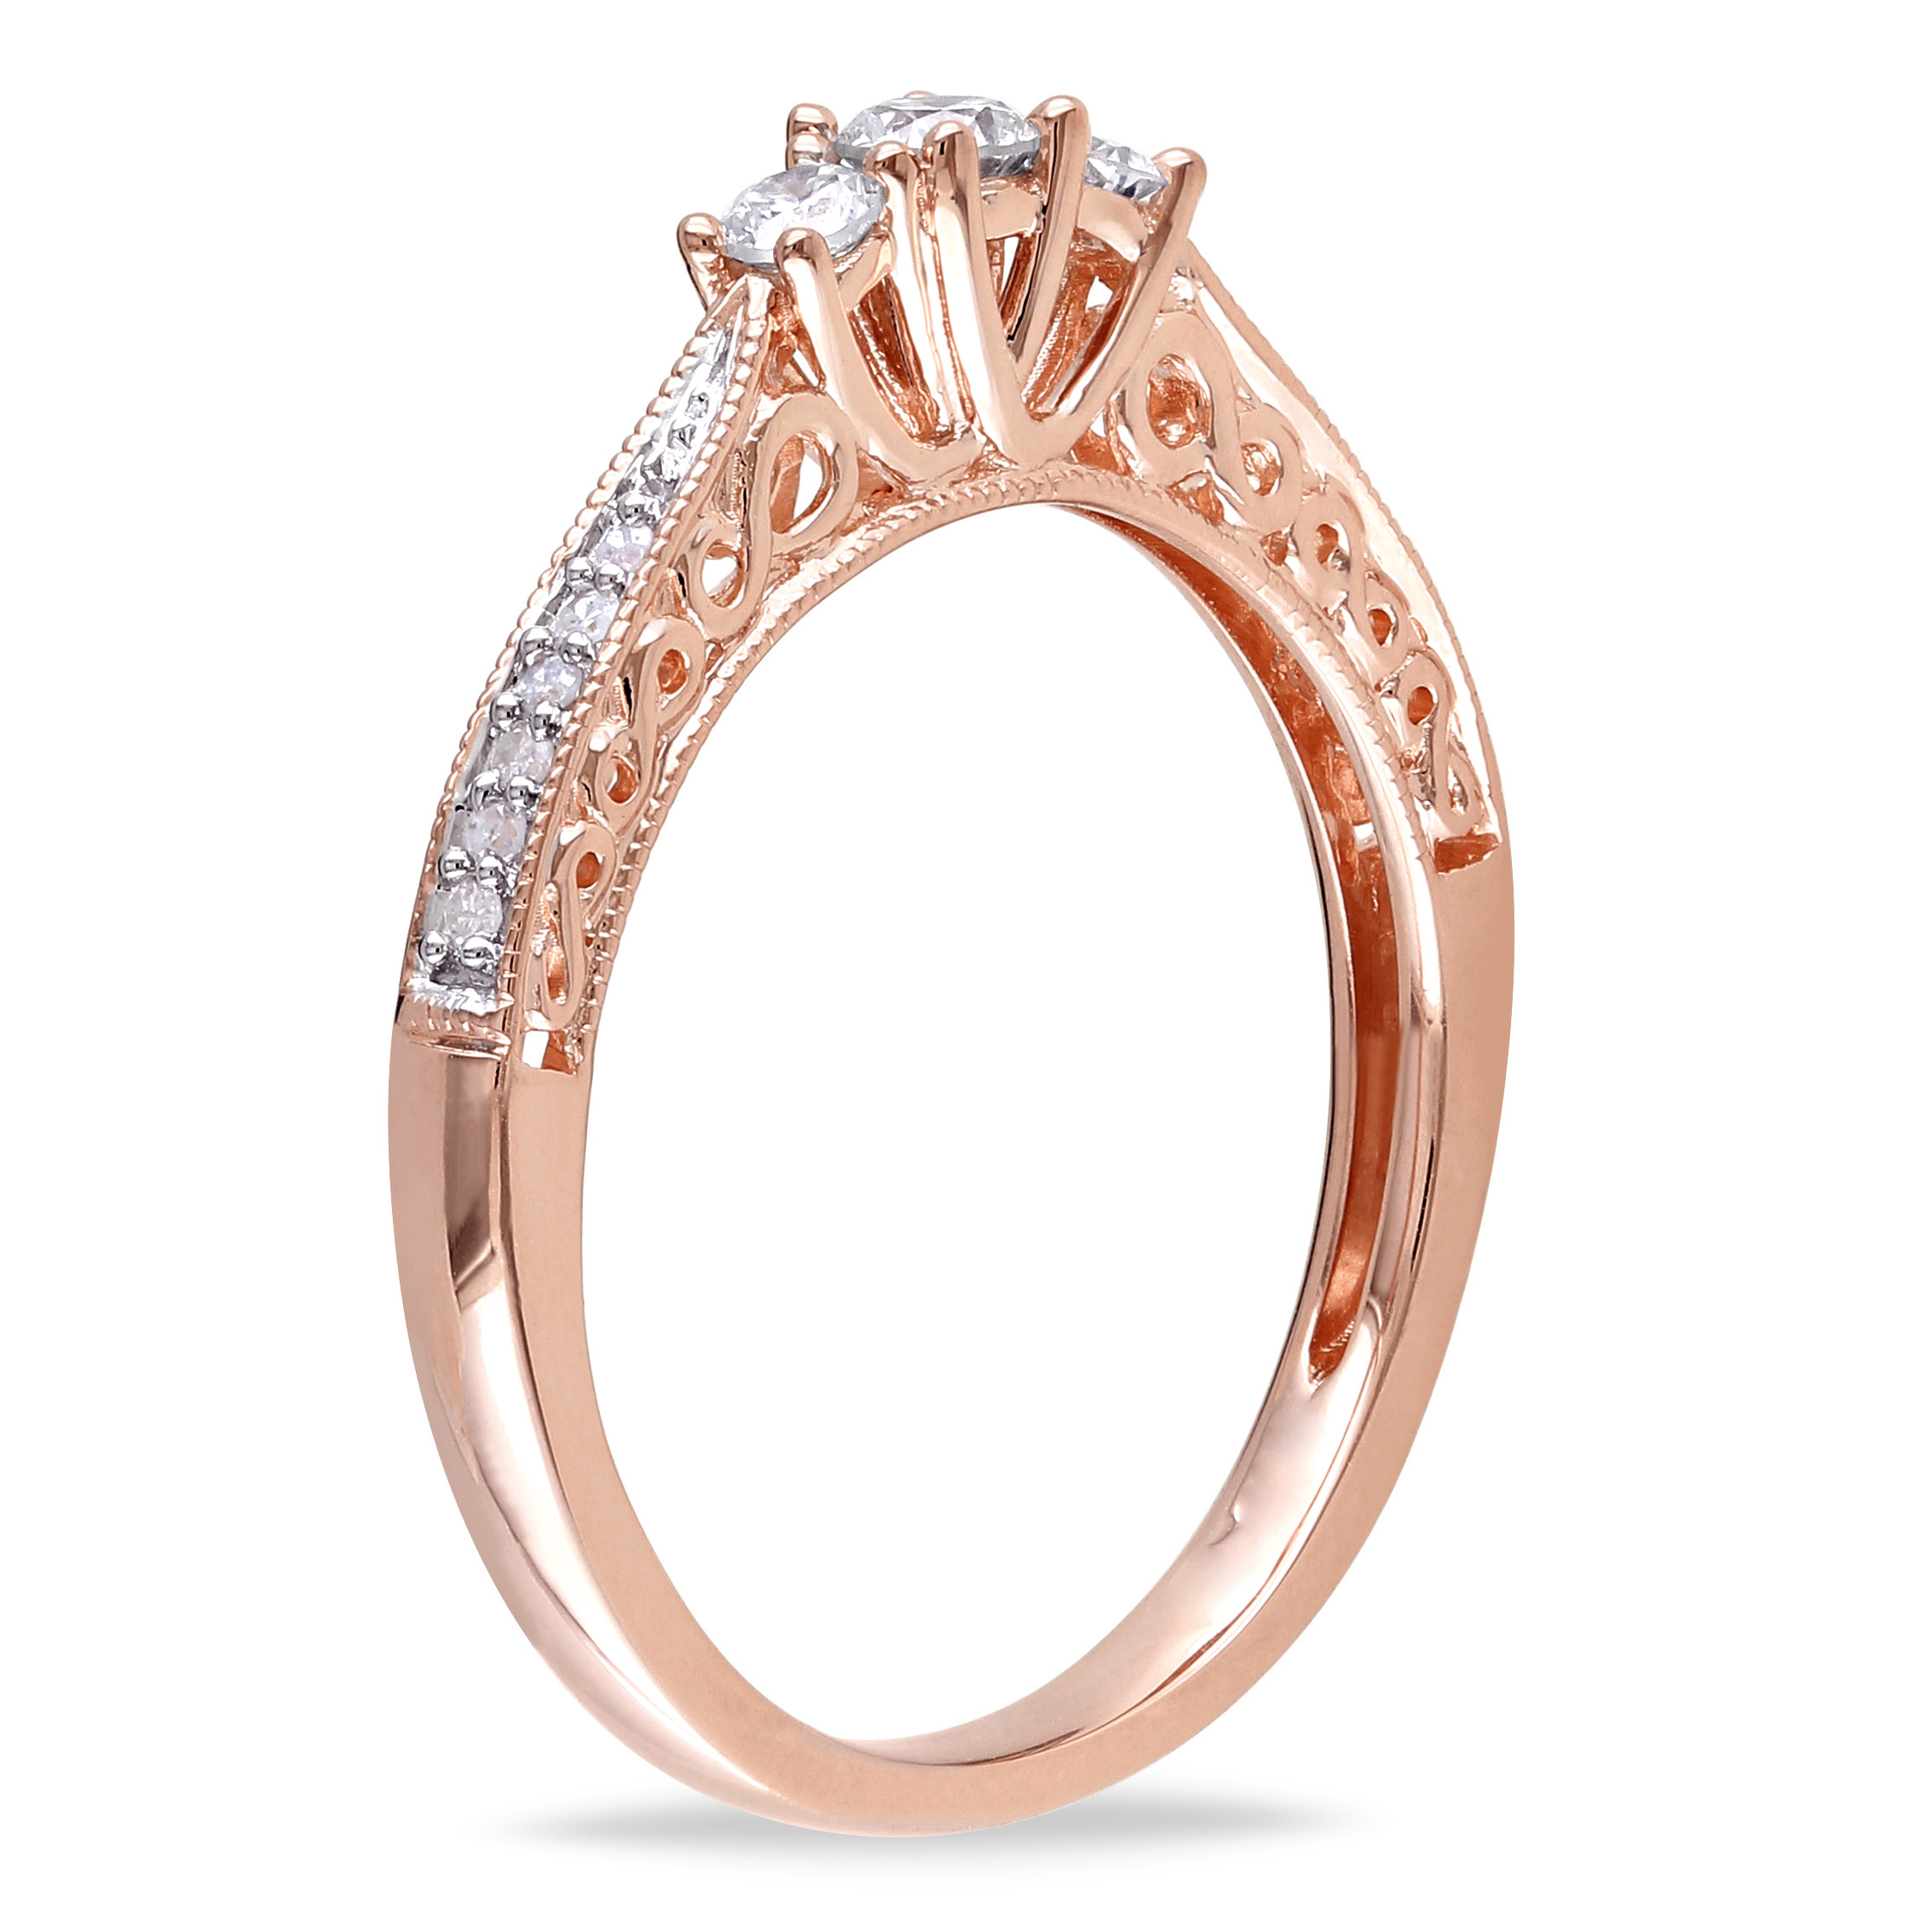 1/4 CT TW Diamond 3-Stone Engagement Ring in 10k Rose Gold